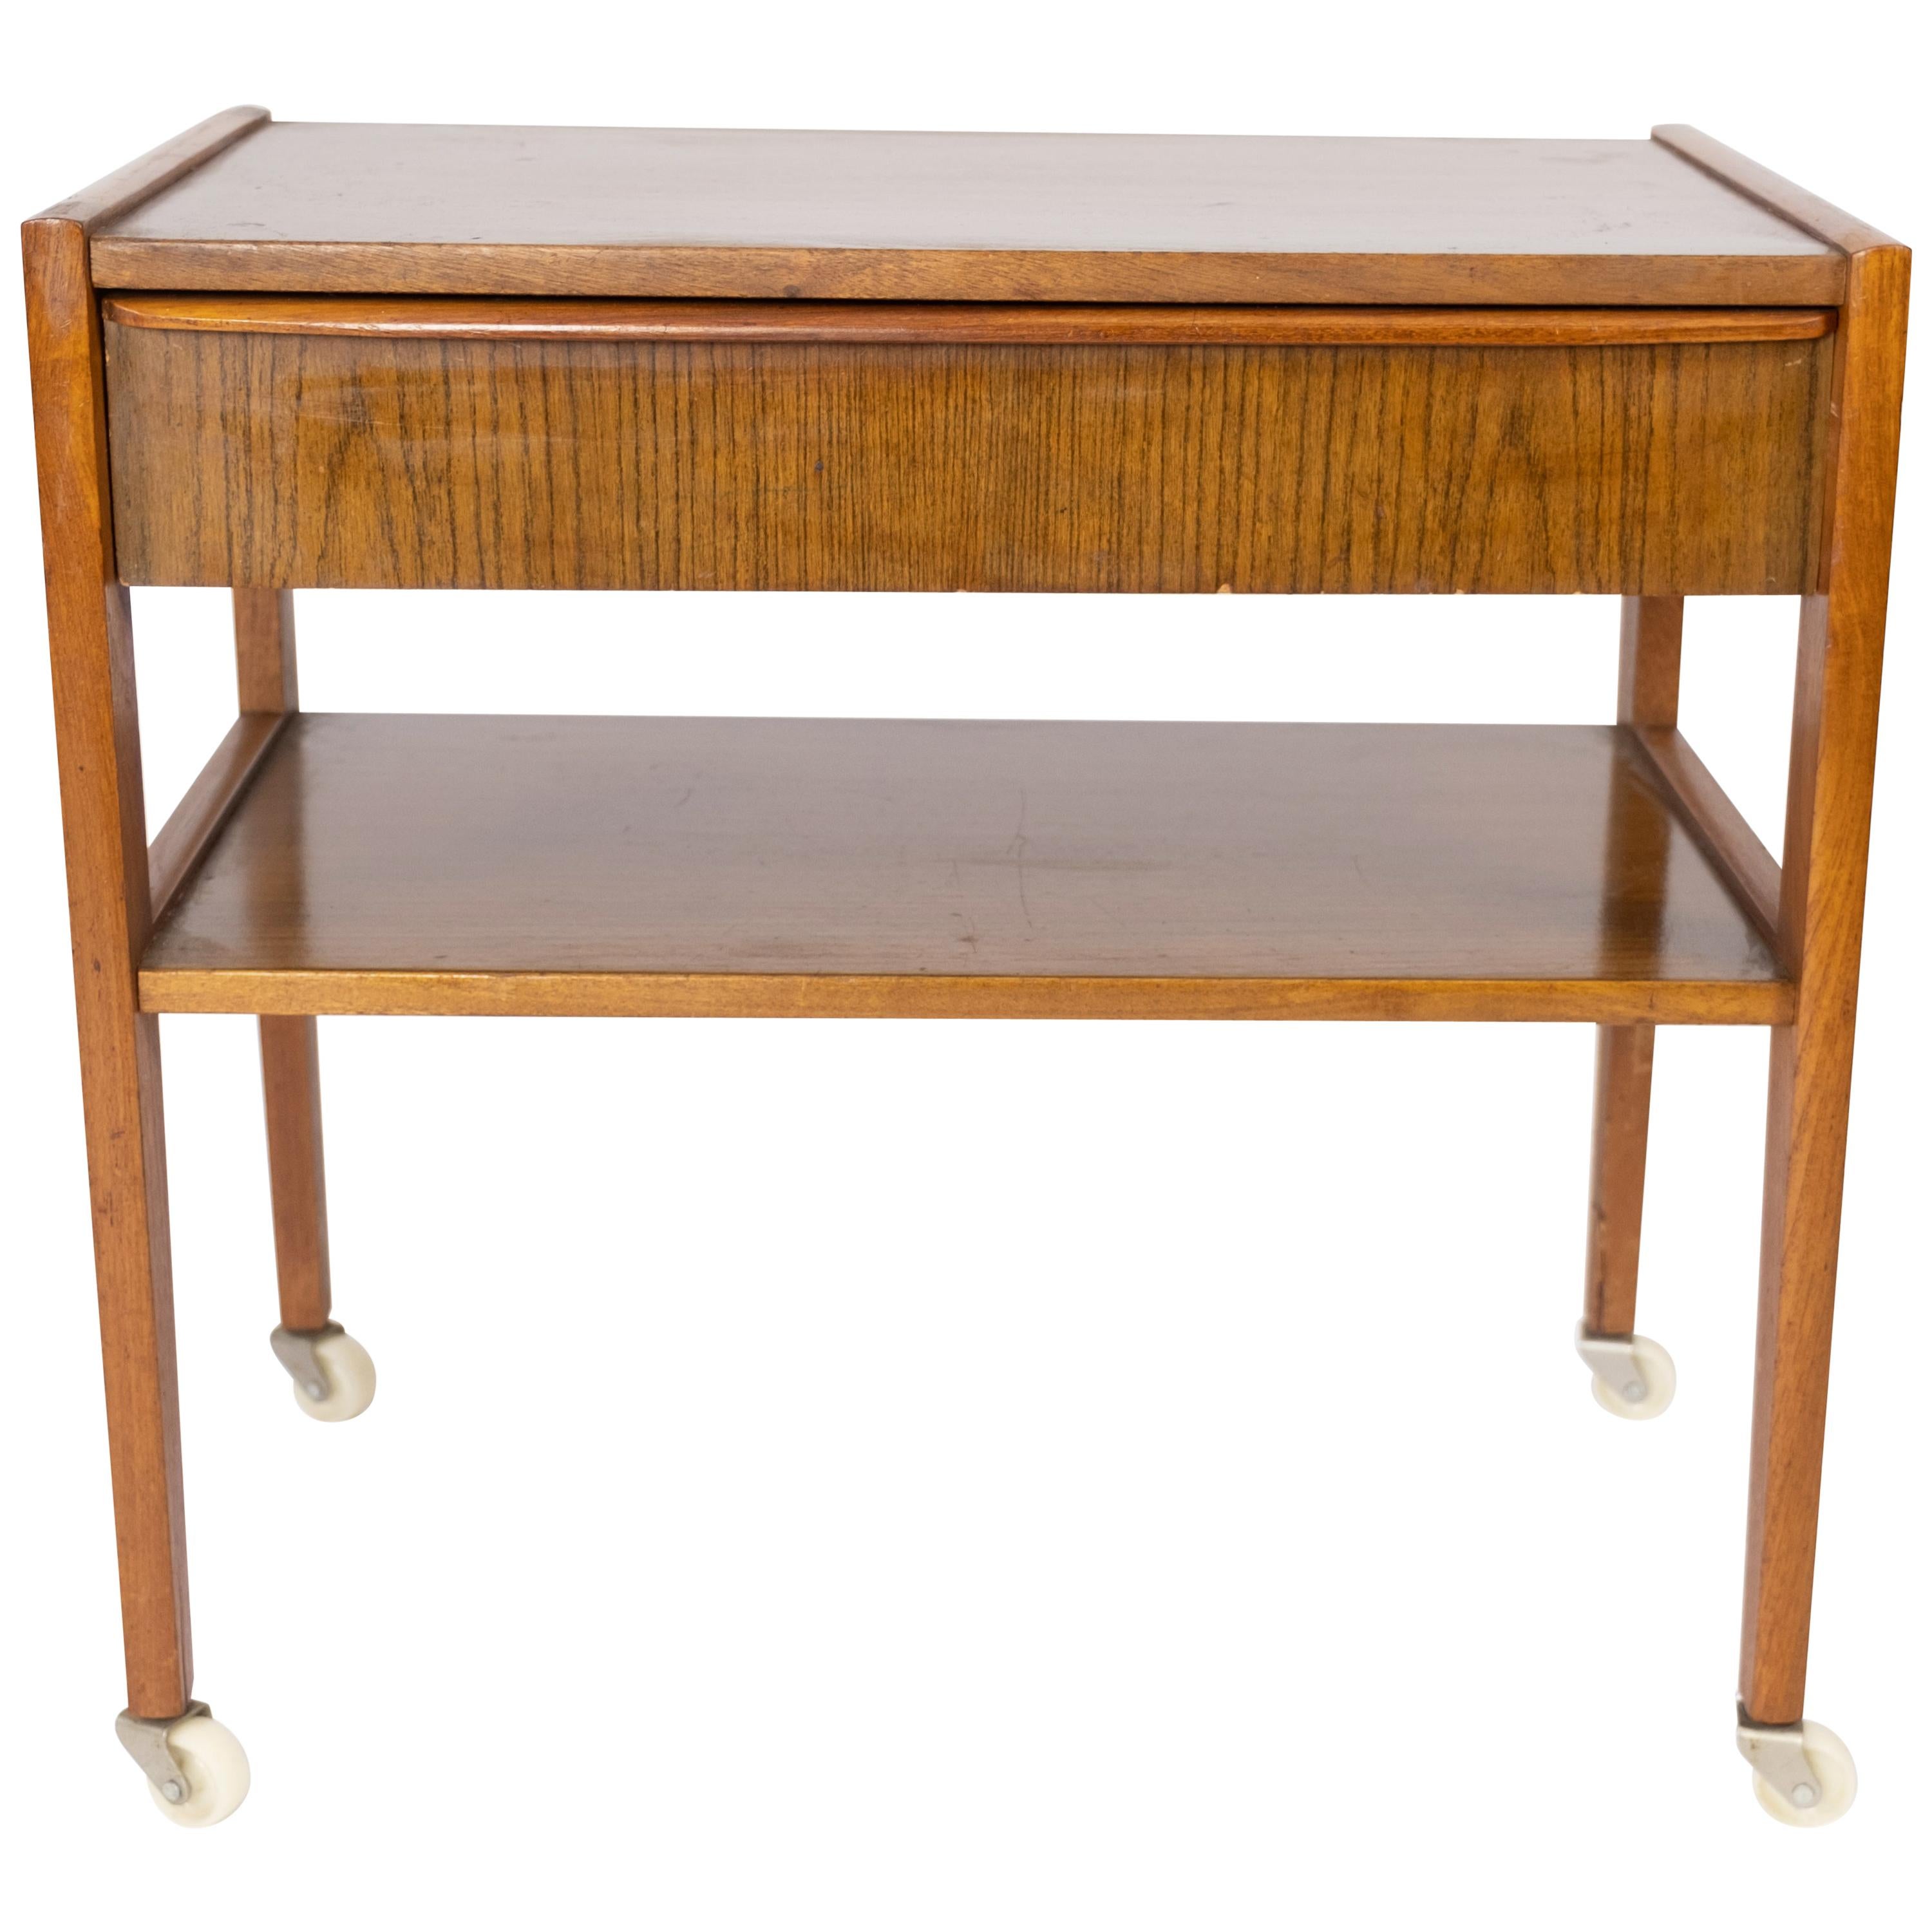 Scandinavian Modern Small Side Table with Drawer in Teak from the 1960s For Sale